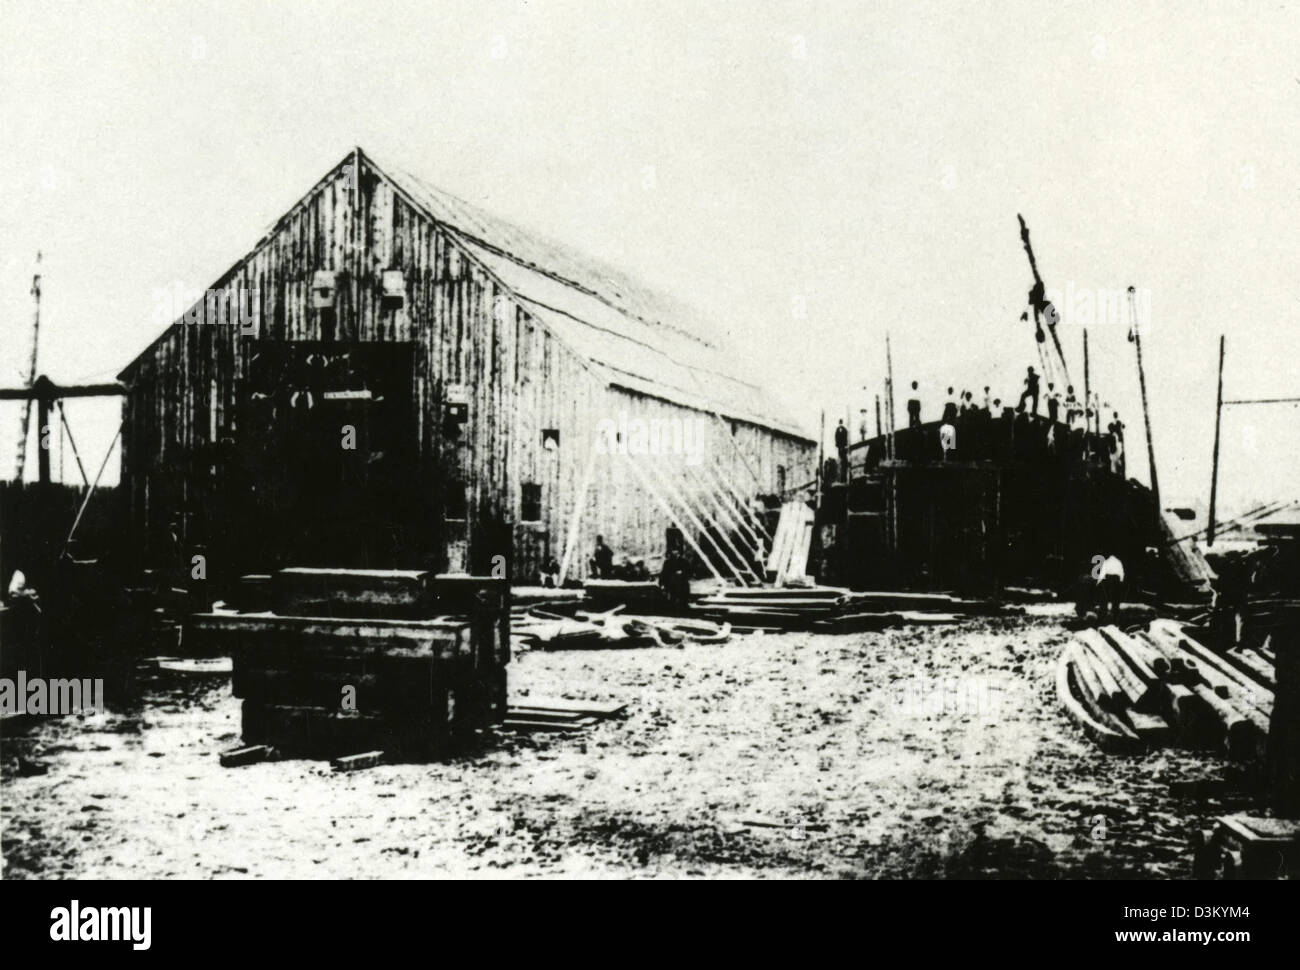 Undated photograph showing the Monitor Shiphouse at Continental Iron Works, Green Point, N.Y. The ironclad Monitor, designed by John Ericson, was a revolutionary vessel that changed the course of the United States Navy. Its battle between the CSS Virginia proved that the age of wooden ships and sail were at an end. Though Monitor's confrontation with CSS Virginia ended in a draw, Monitor prevented the Virginia from gaining control of Hampton Roads and thus preserved the Federal blockade of the Norfolk area. Stock Photo